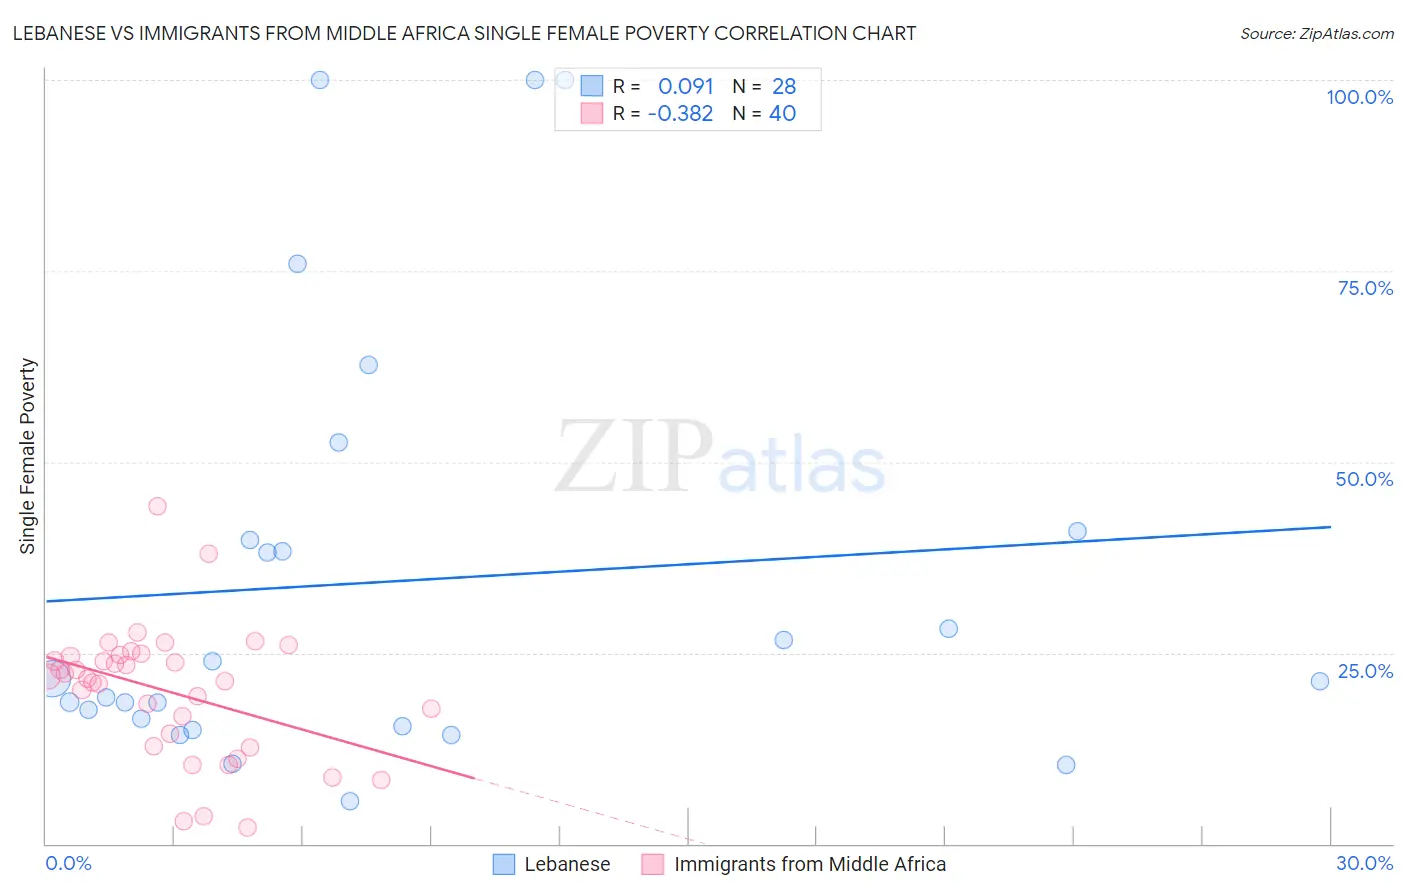 Lebanese vs Immigrants from Middle Africa Single Female Poverty